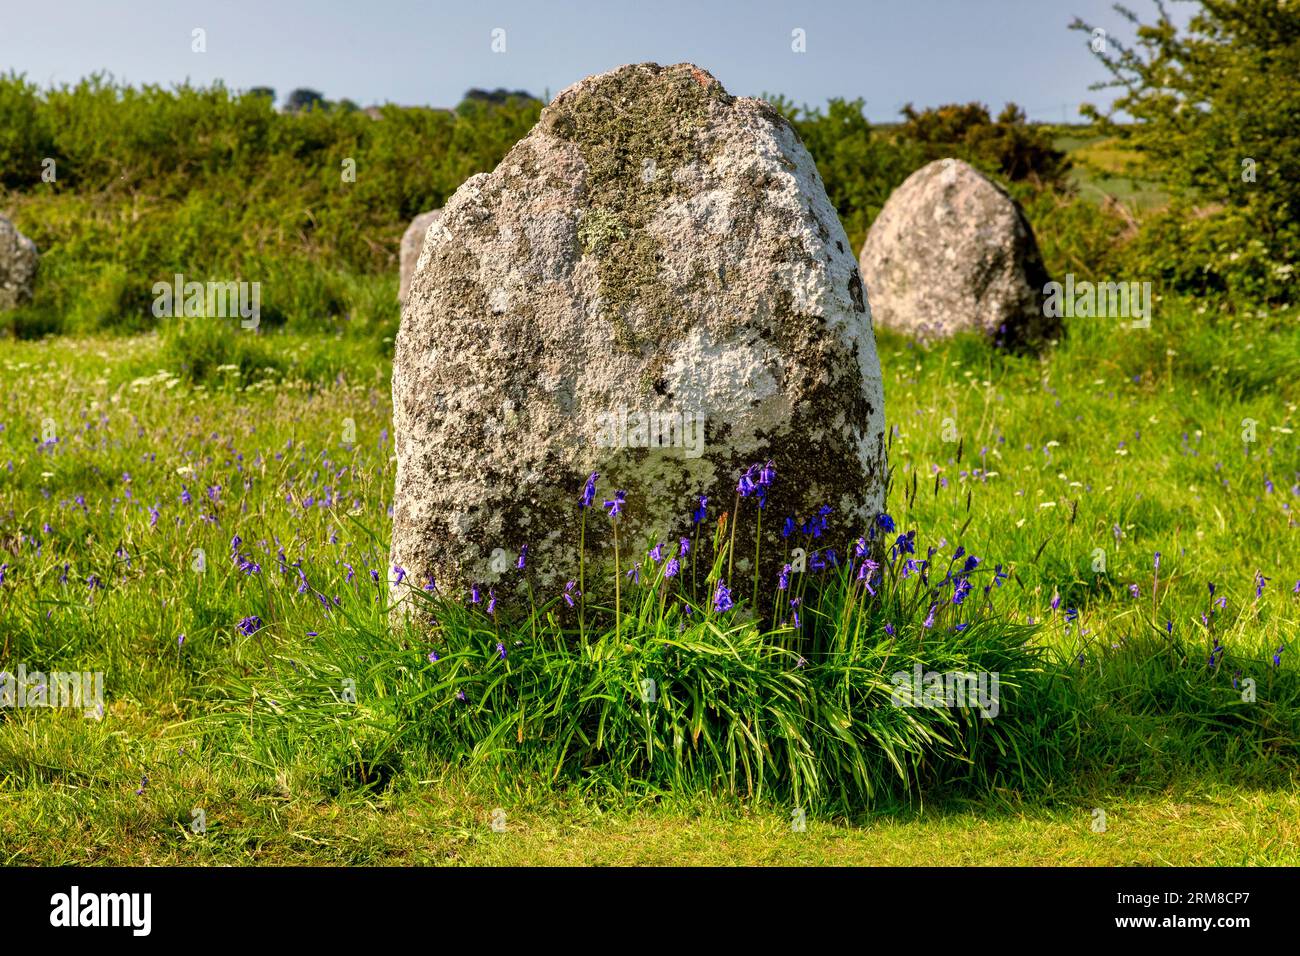 Close up of one of the standing stones in the Boscawen-un stone circle, near St Buryan, Cornwall, UK. Focus on foreground. Stock Photo